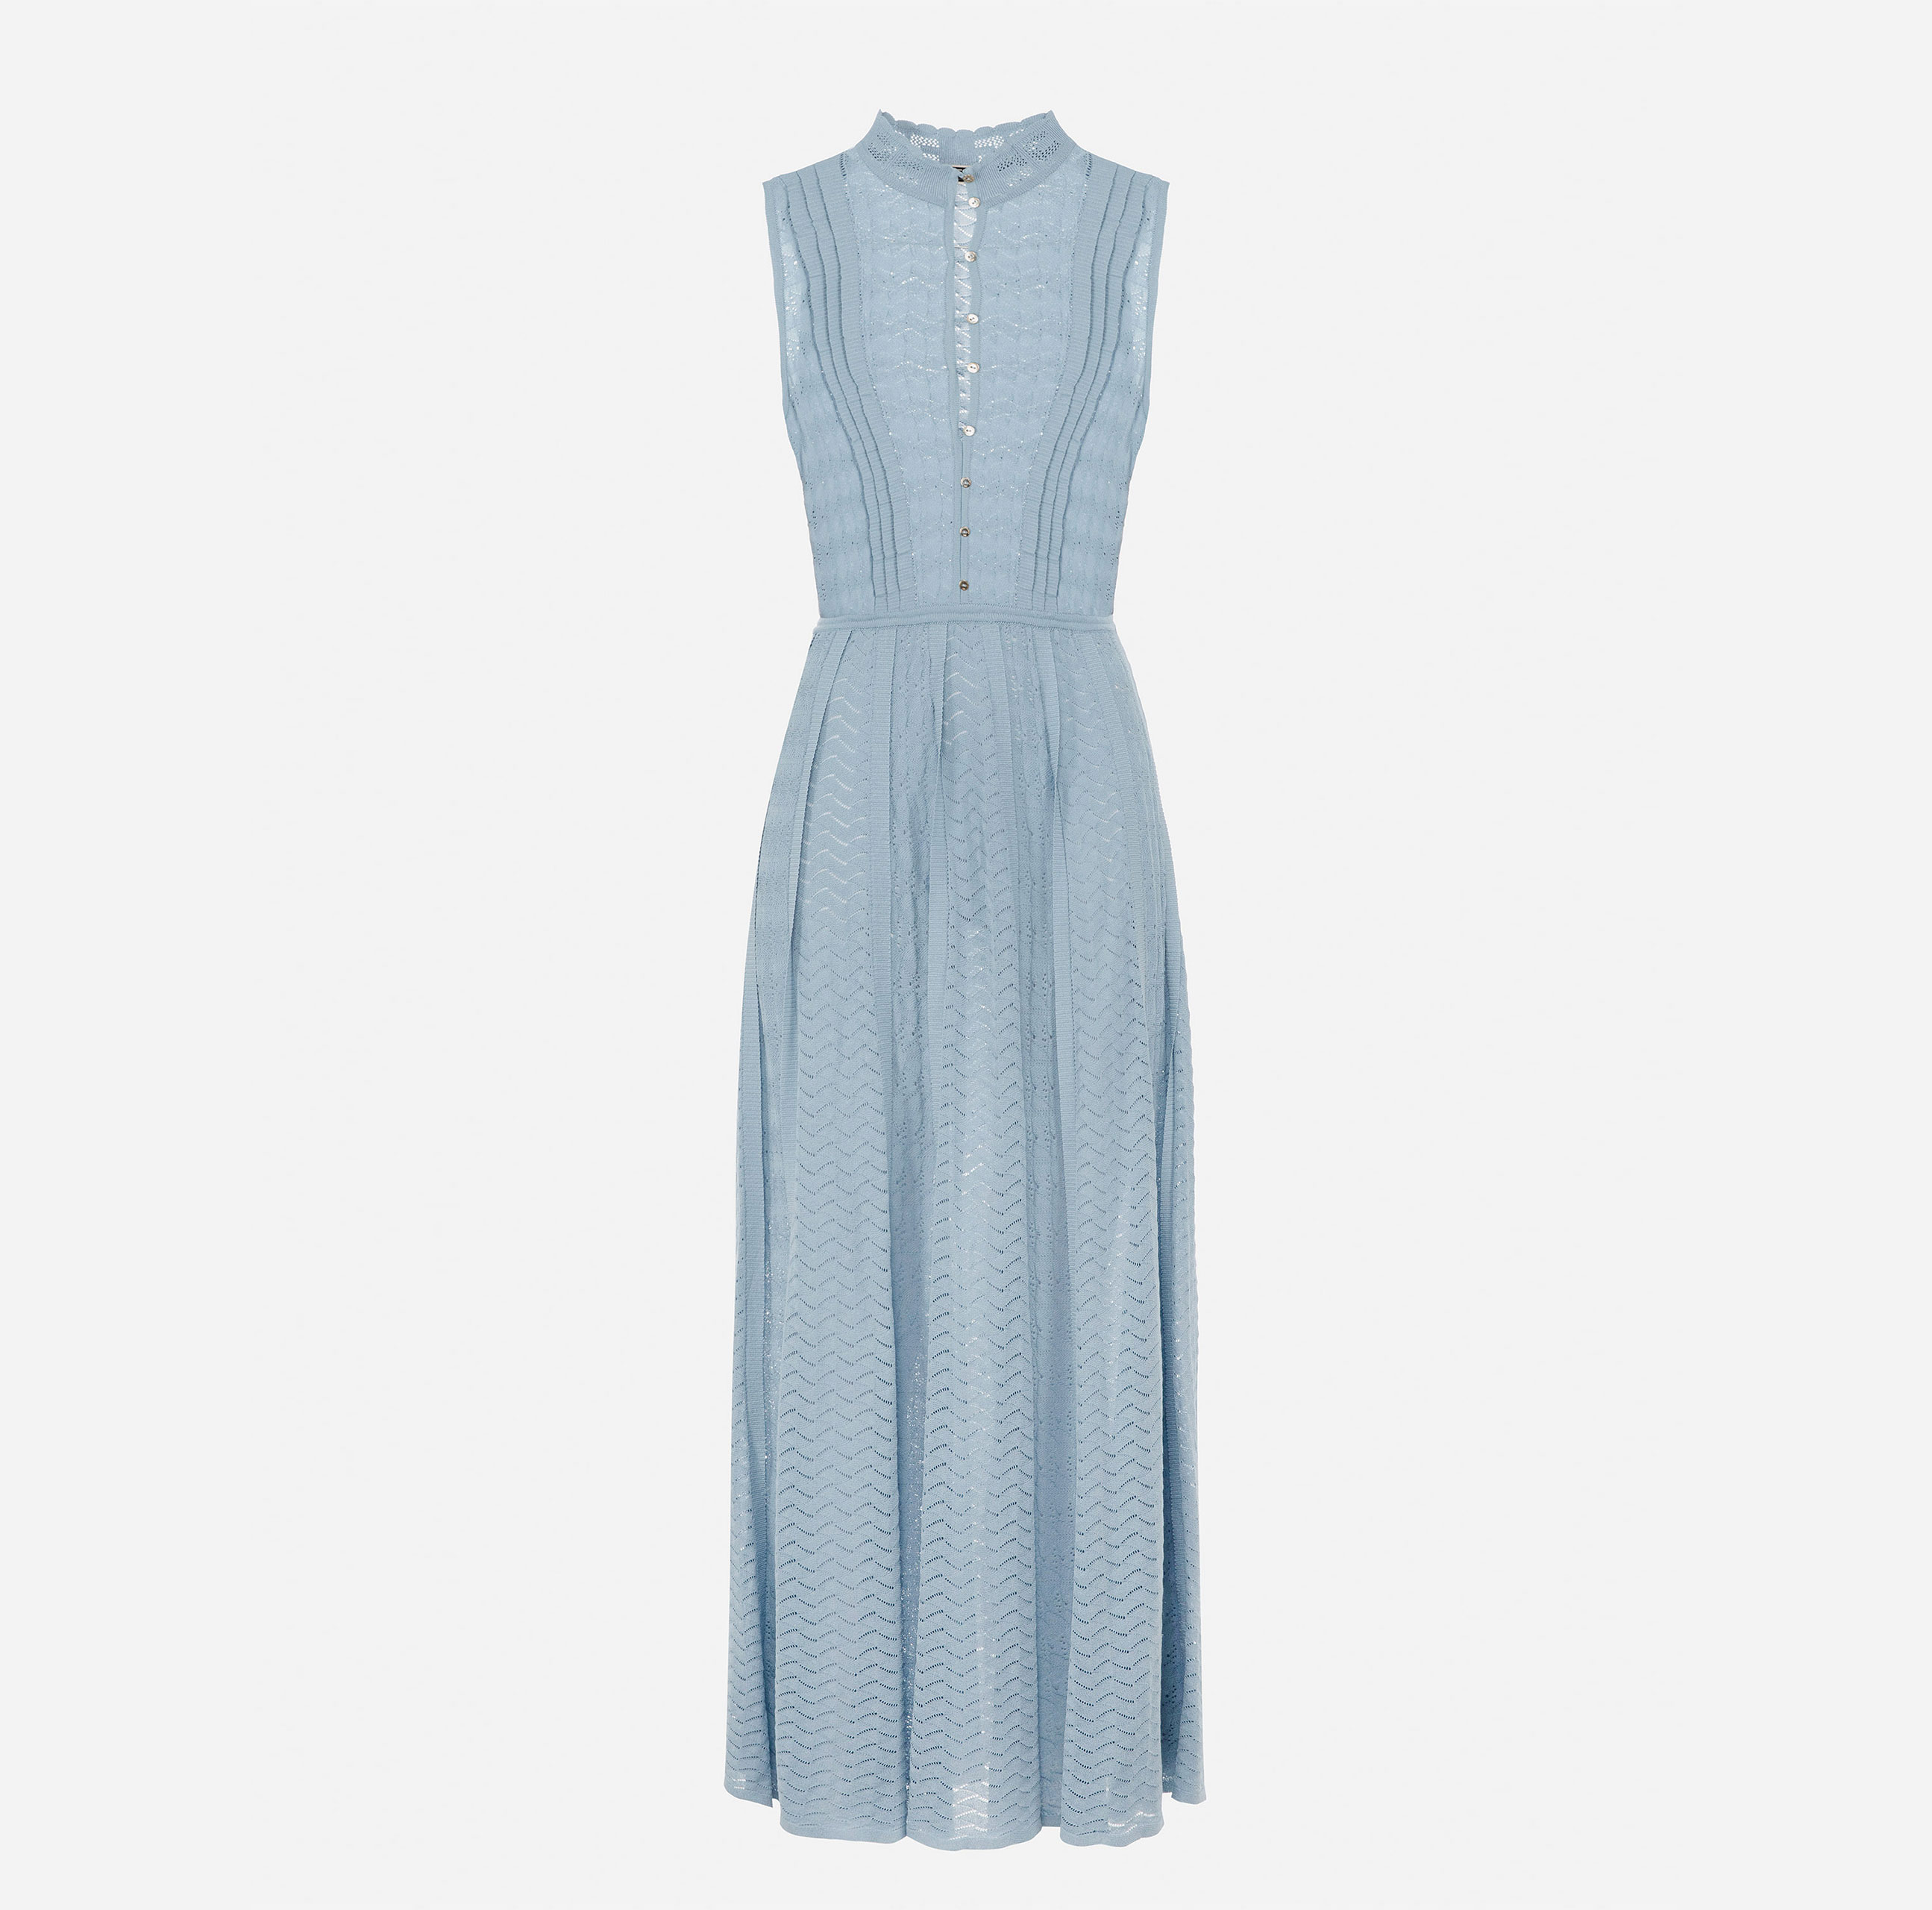 Dress with collar in lace stitch | Elisabetta Franchi